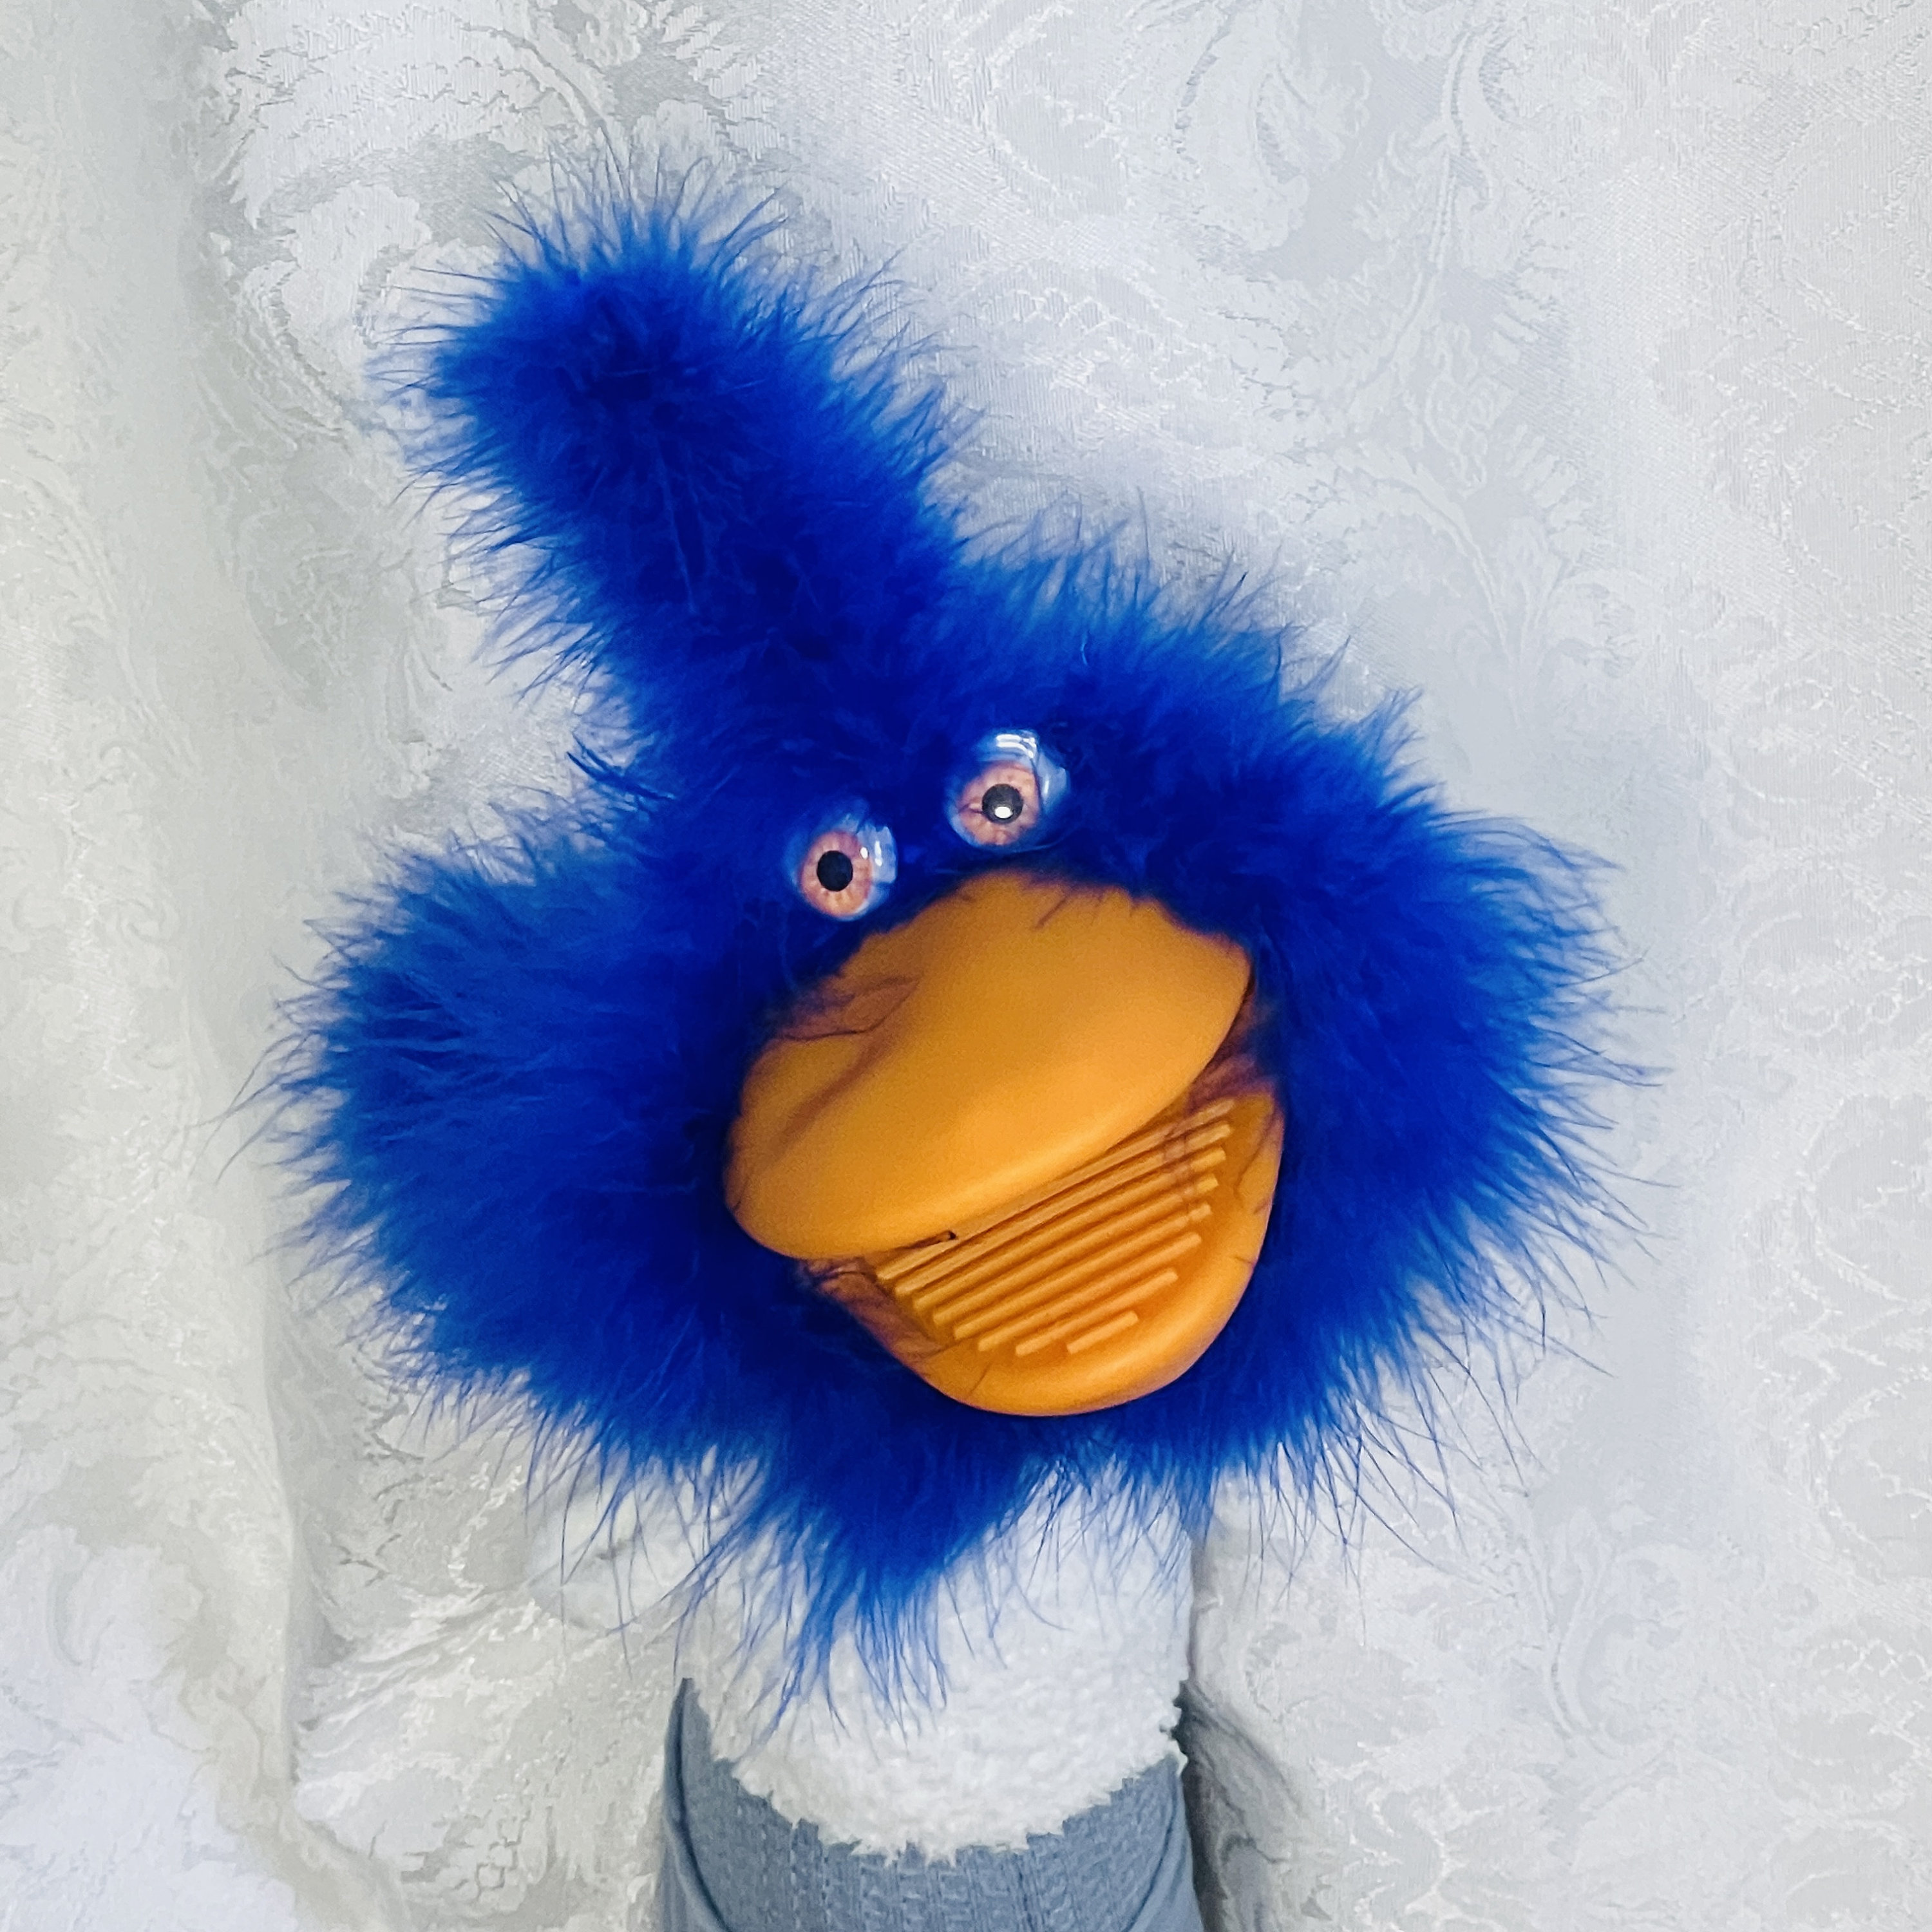 Blue Bird Mouth Puppet Handmade Toy Expressive pic